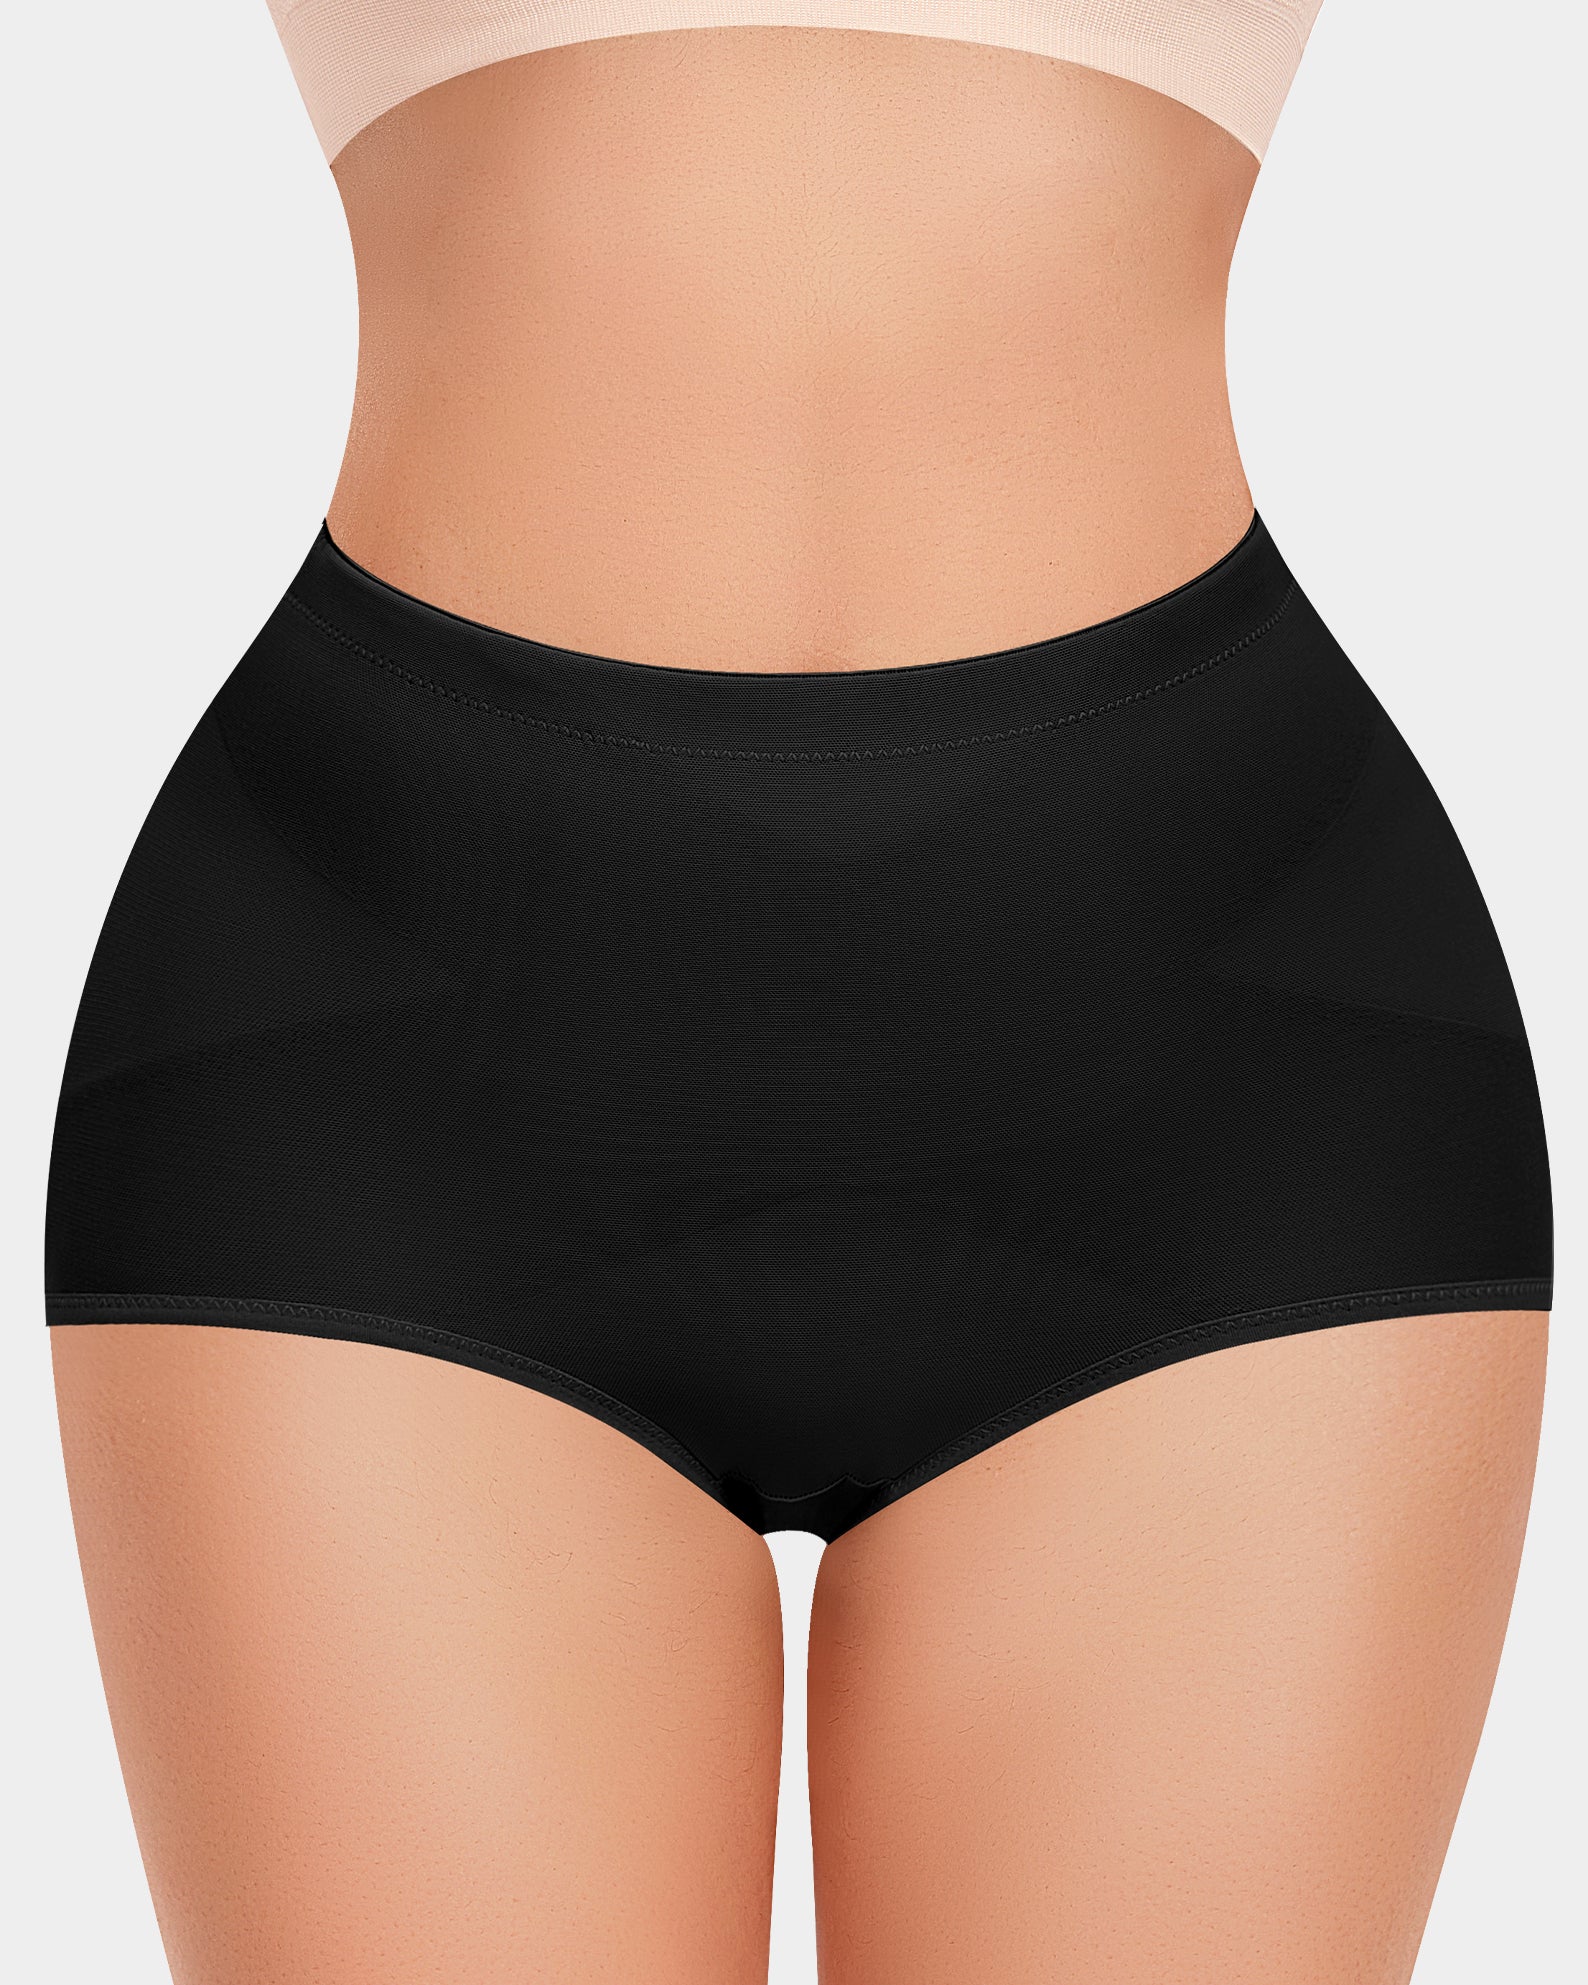 Werena tummy control thong 2.0  see the details- it's a high